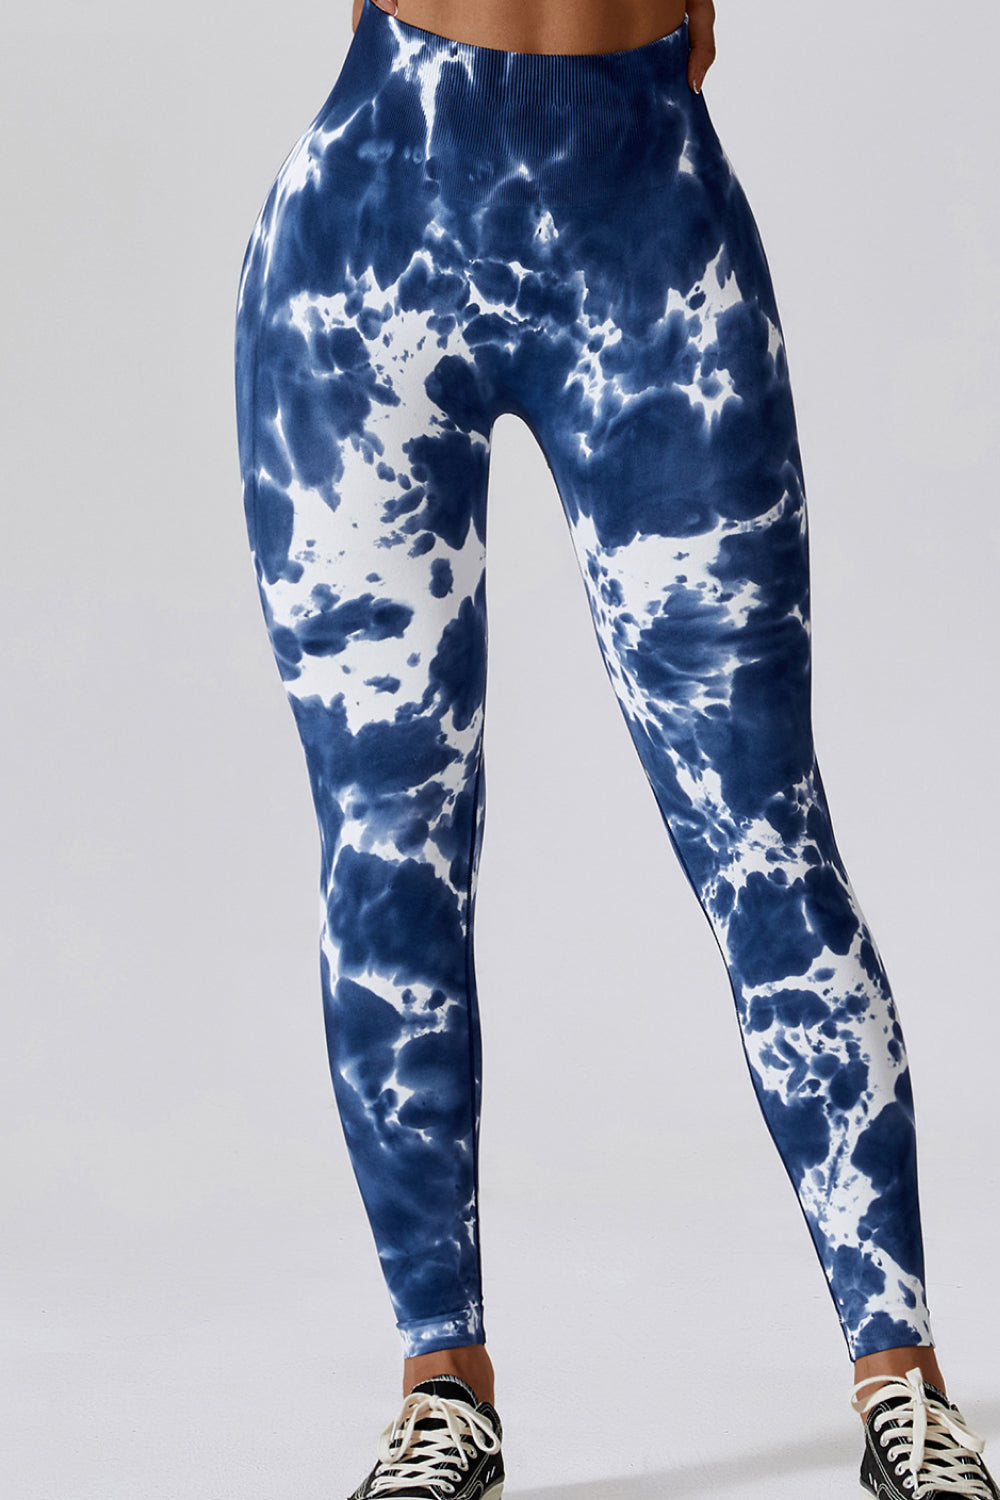 High Waist Tie-Dye Long Sports Pants Other Colors Available